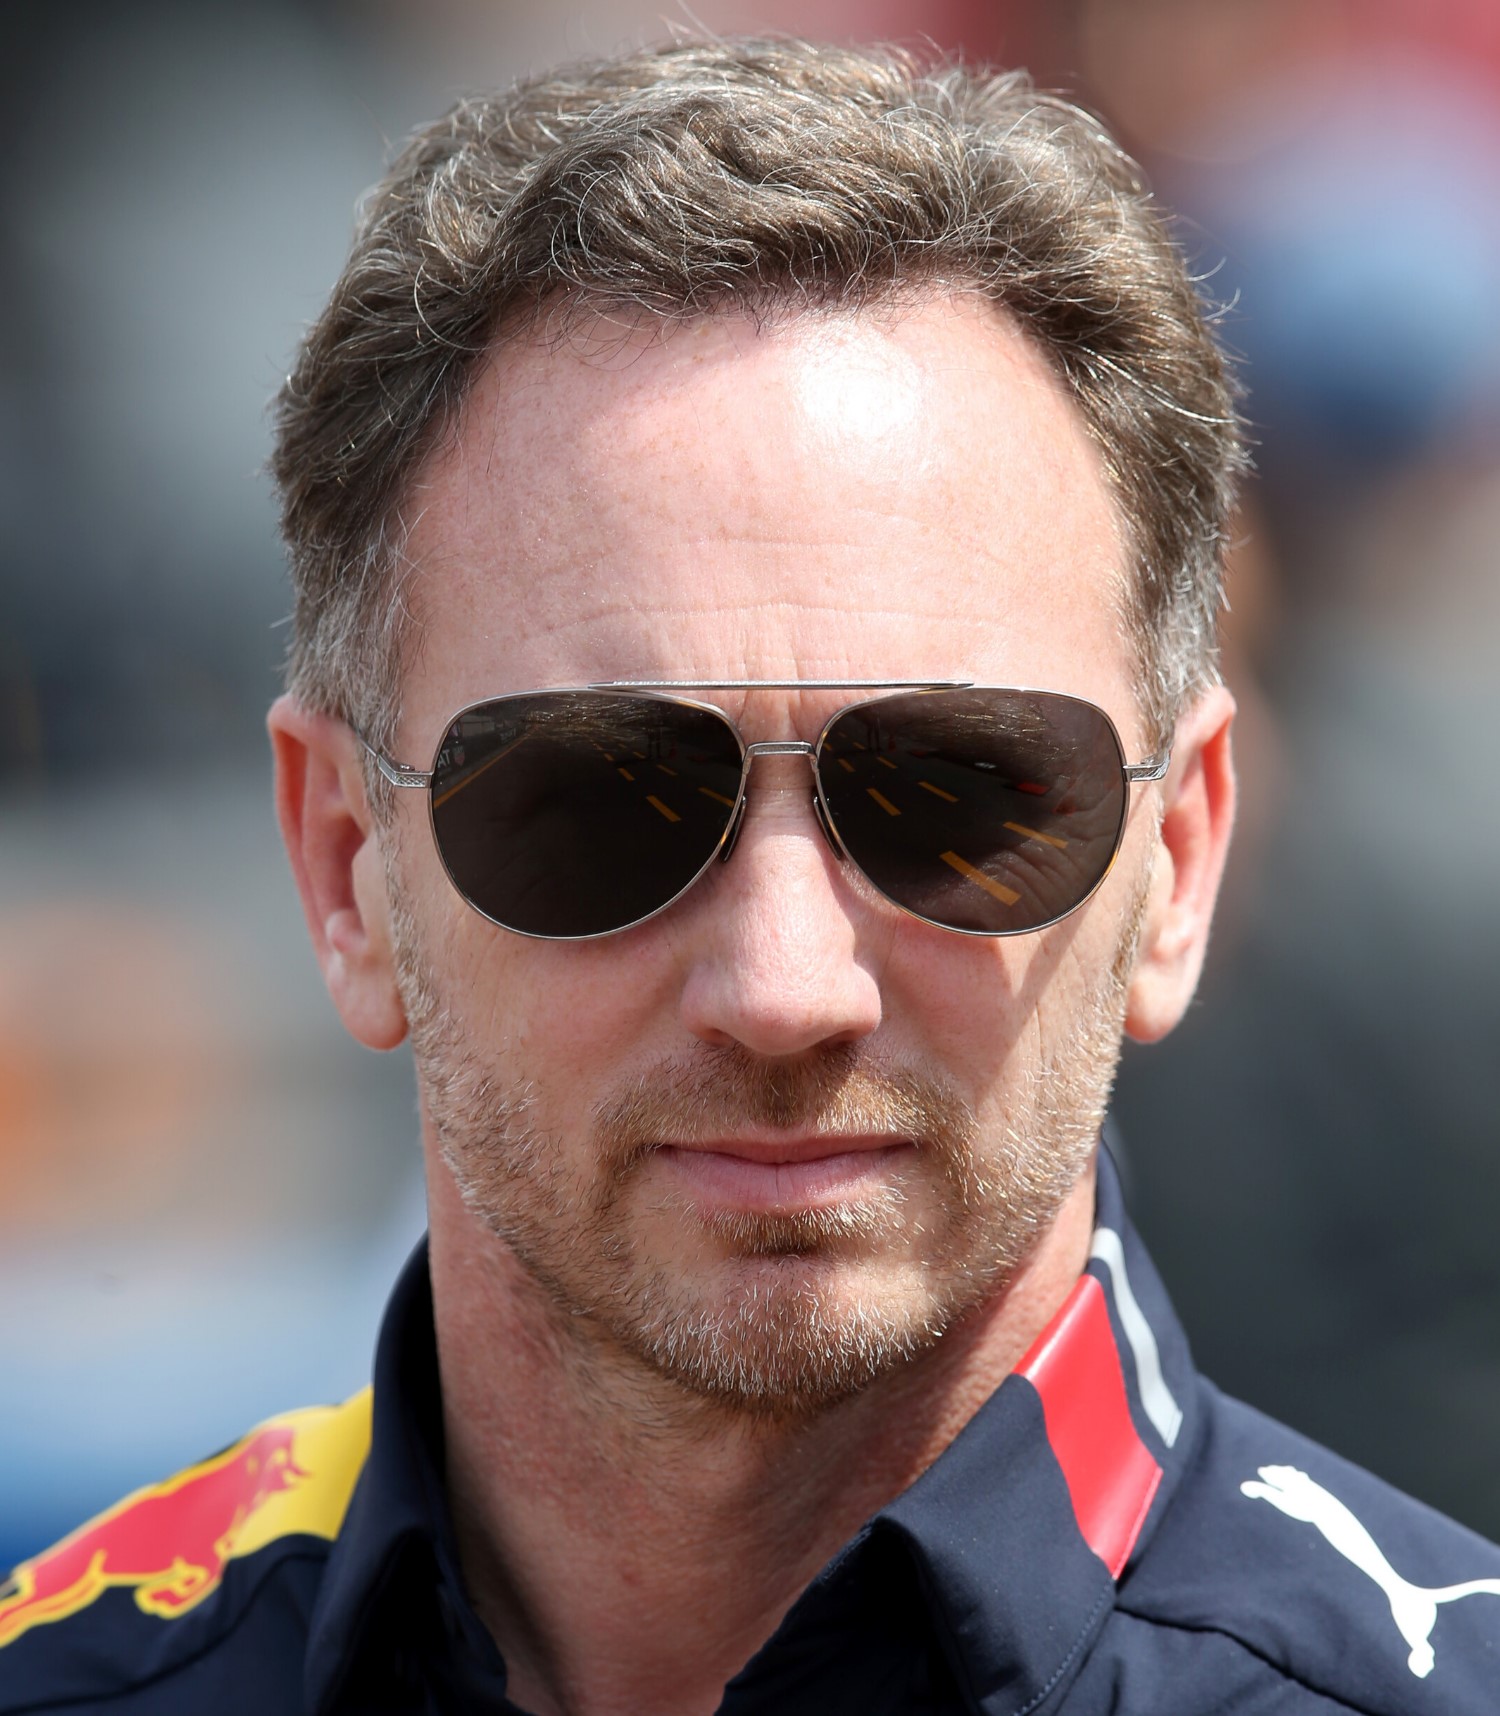 Horner should reach into his bank account and help to bail them out